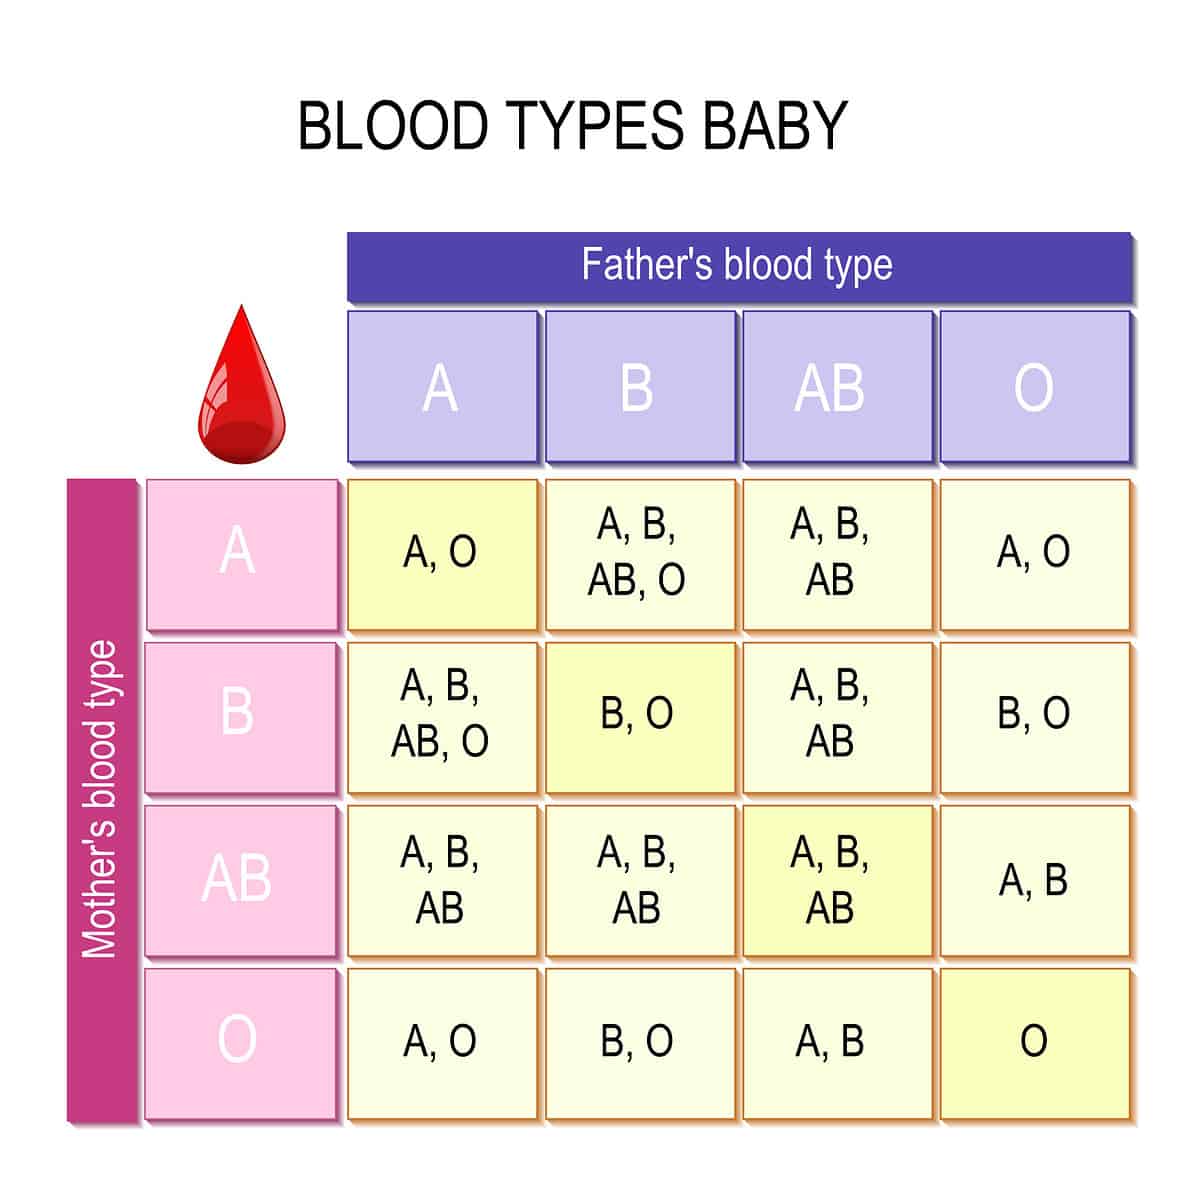 Blood type chart that shows how baby's blood type is determined